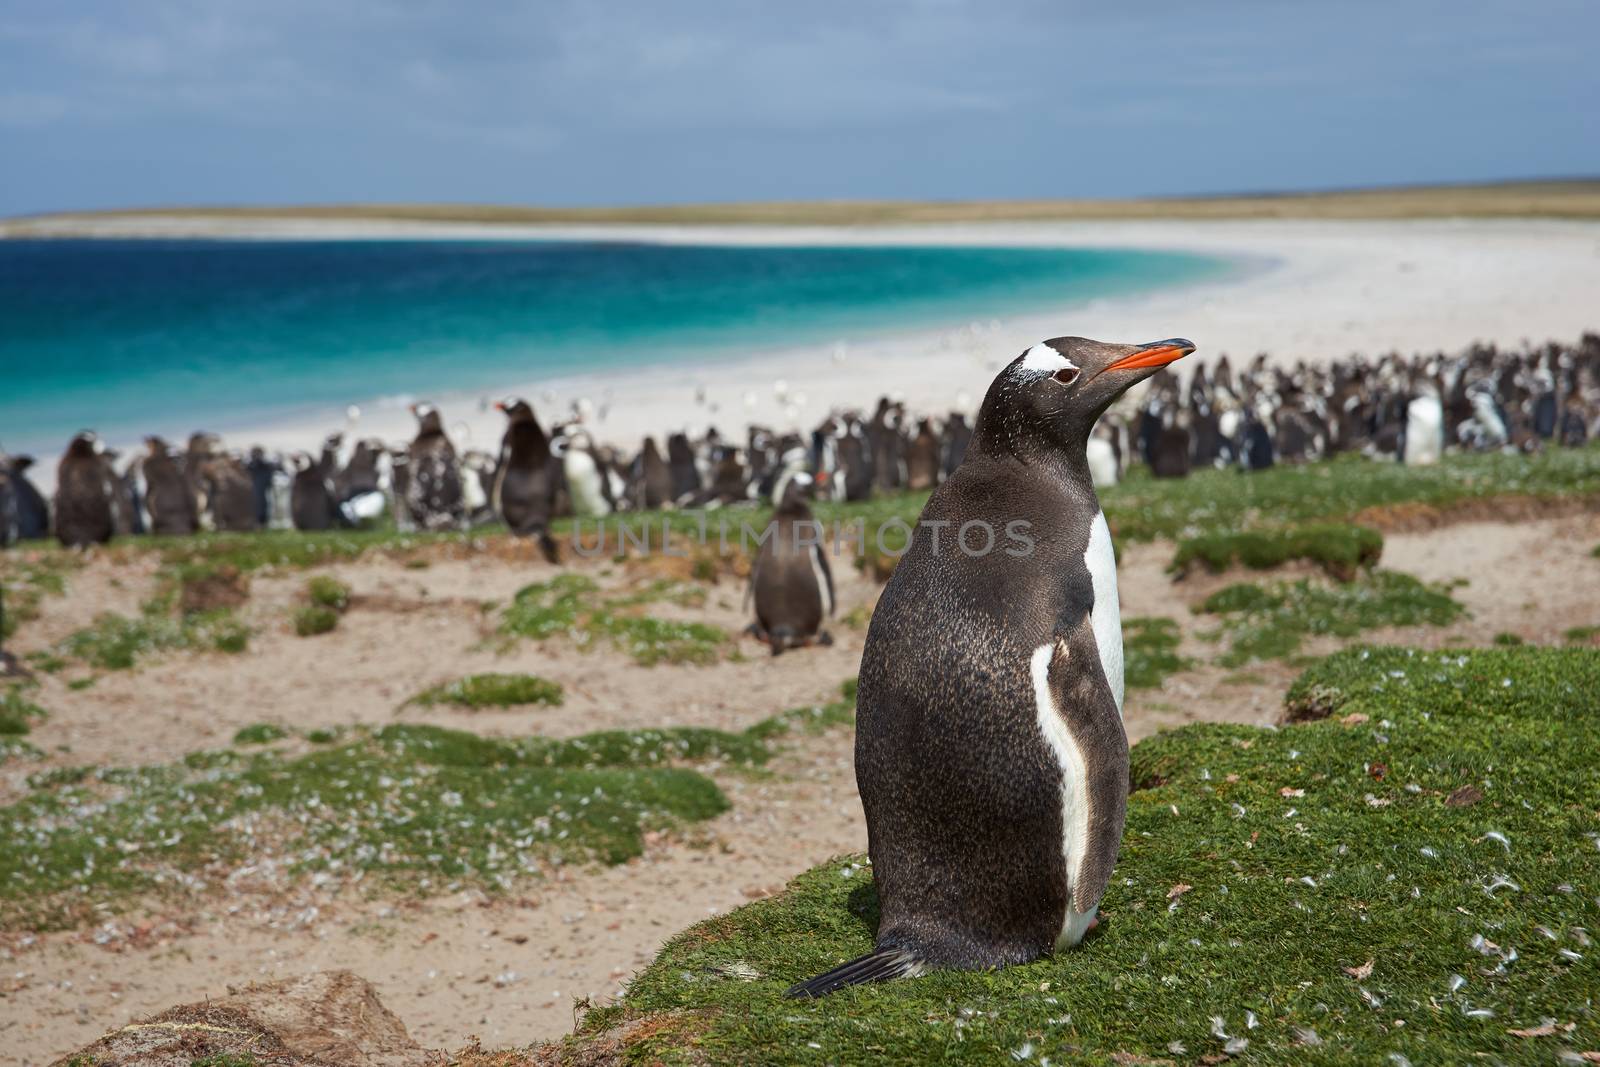 Gentoo Penguin (Pygoscelis papua) on Bleaker Island in the Falkland Islands. Thousands of Gentoo Penguins and Magellanic Penguins (Spheniscus magellanicus) crowd the beach in the background.